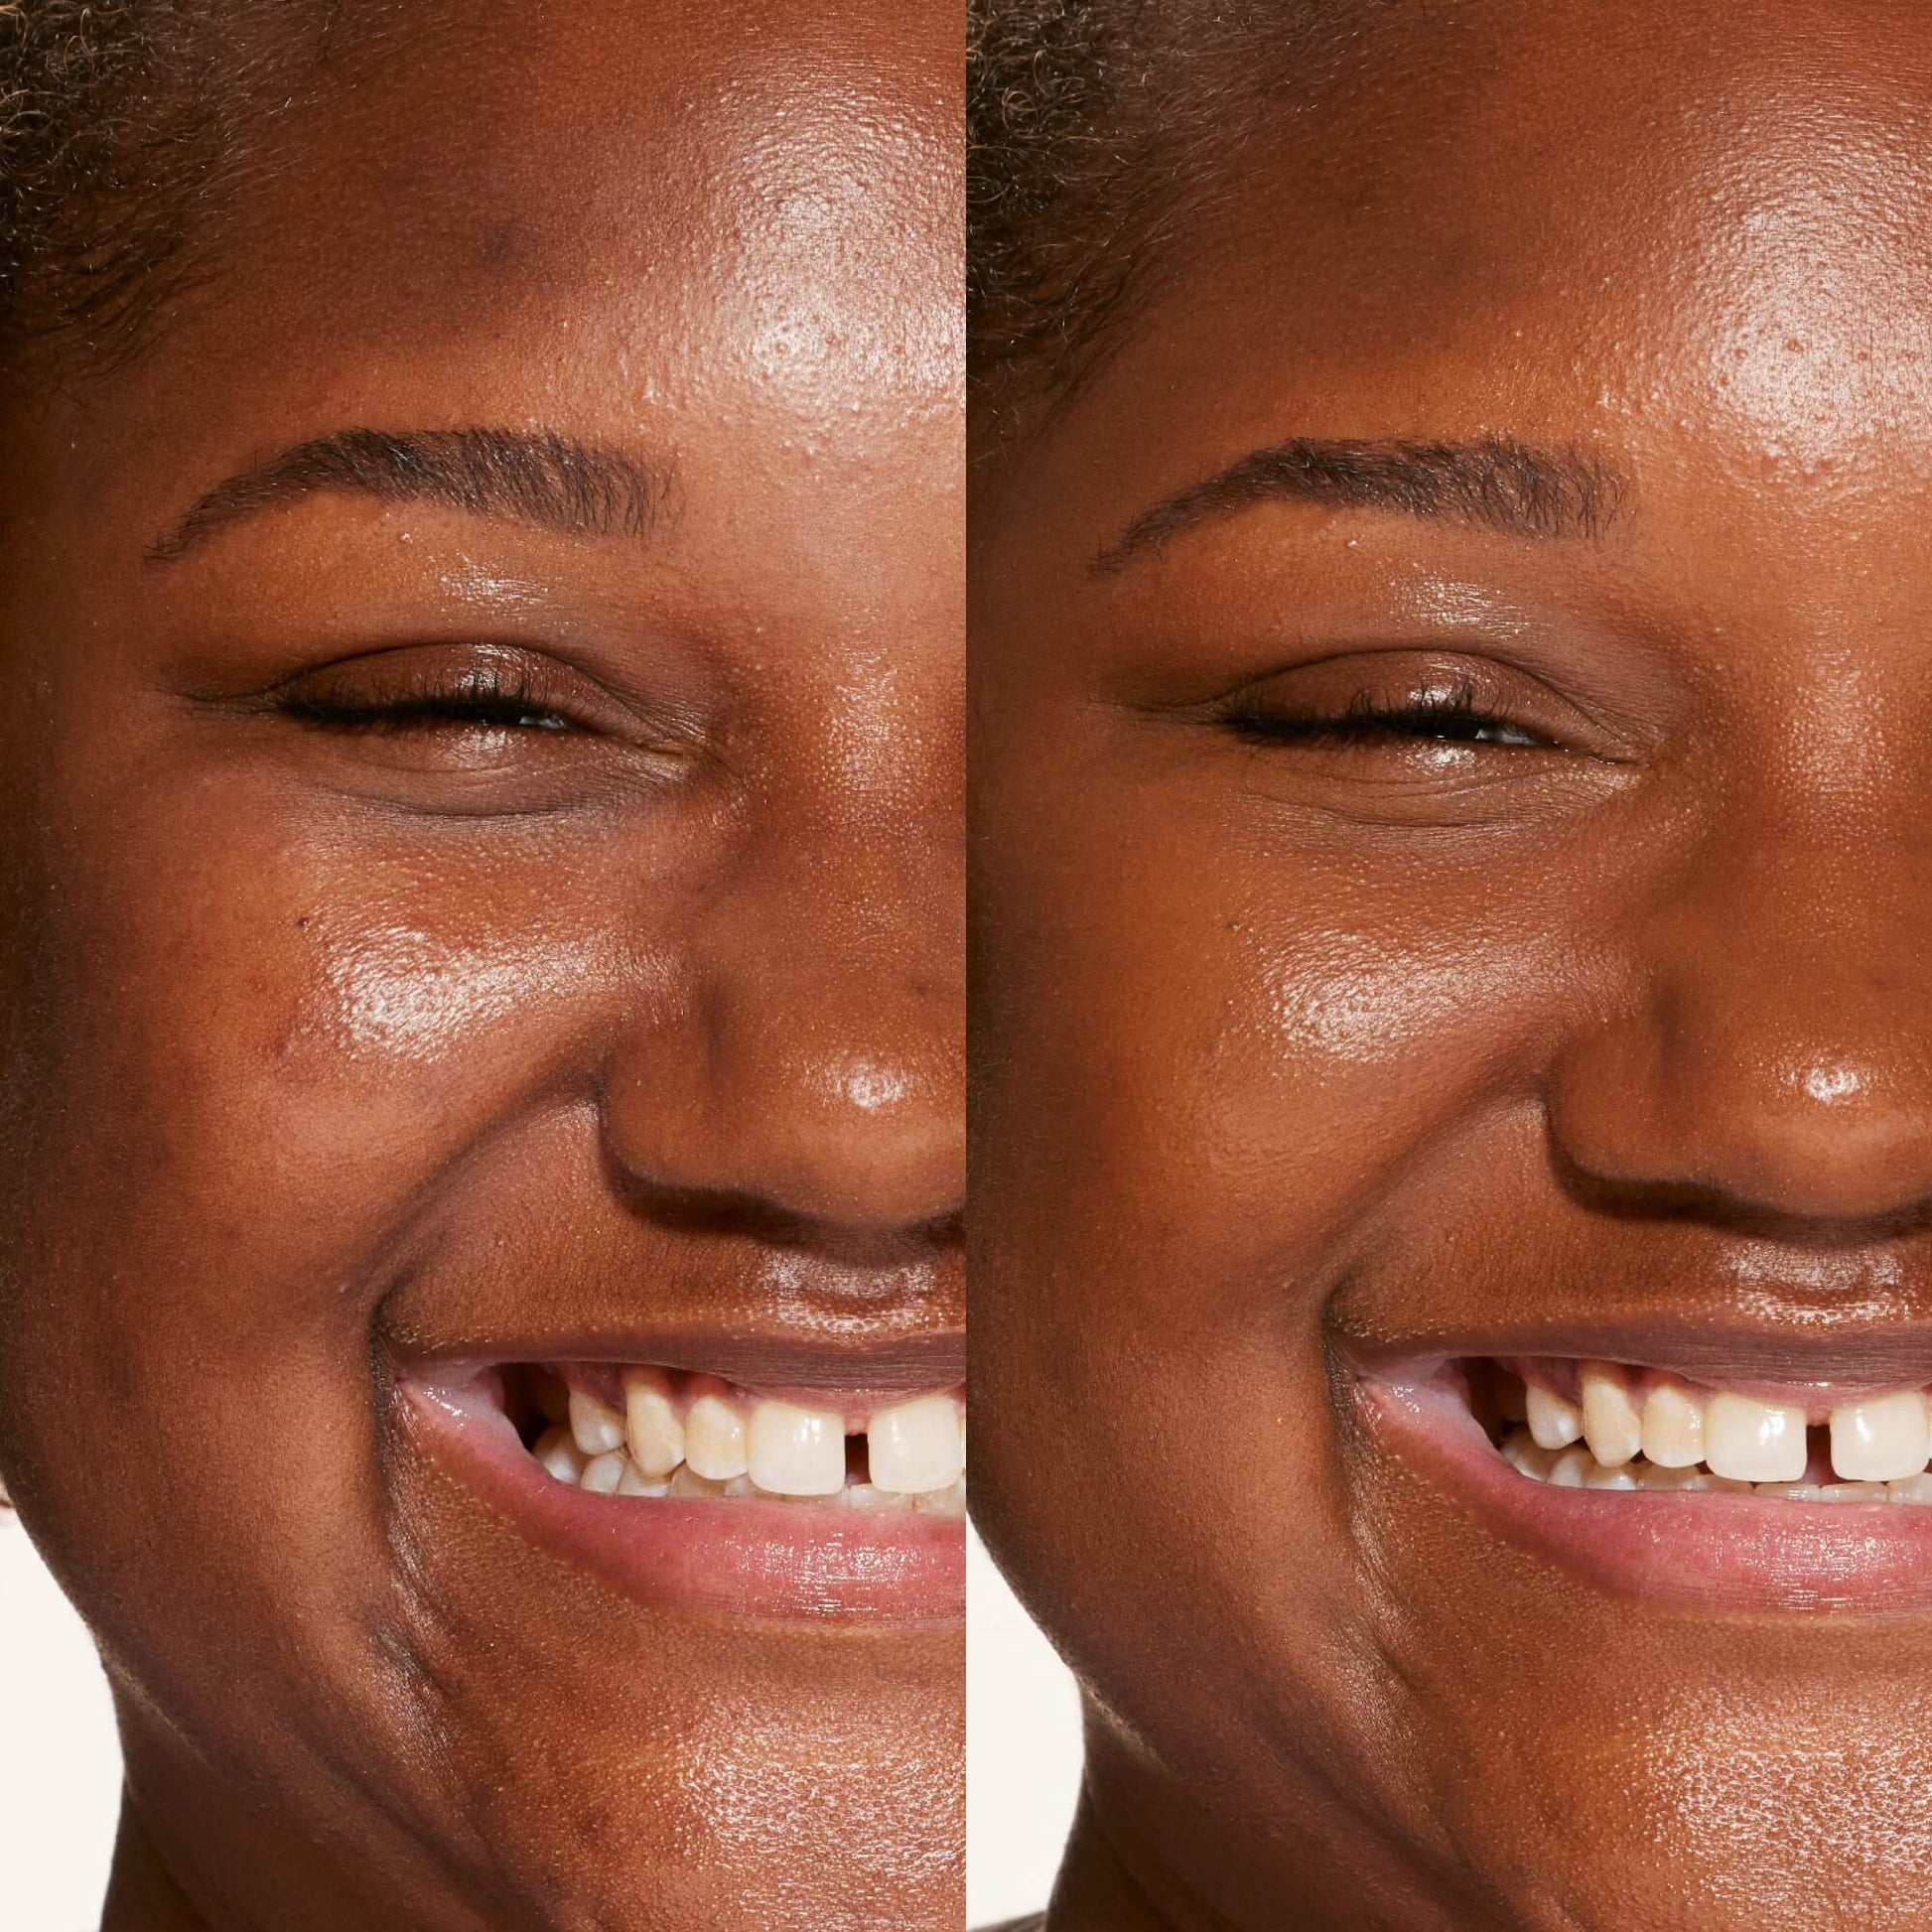 A person's face before and after using Tower 28 Beauty's Swipe Serum Concealer in shade 19.0 WEHO to cover up dark circles, blemishes, and discoloration